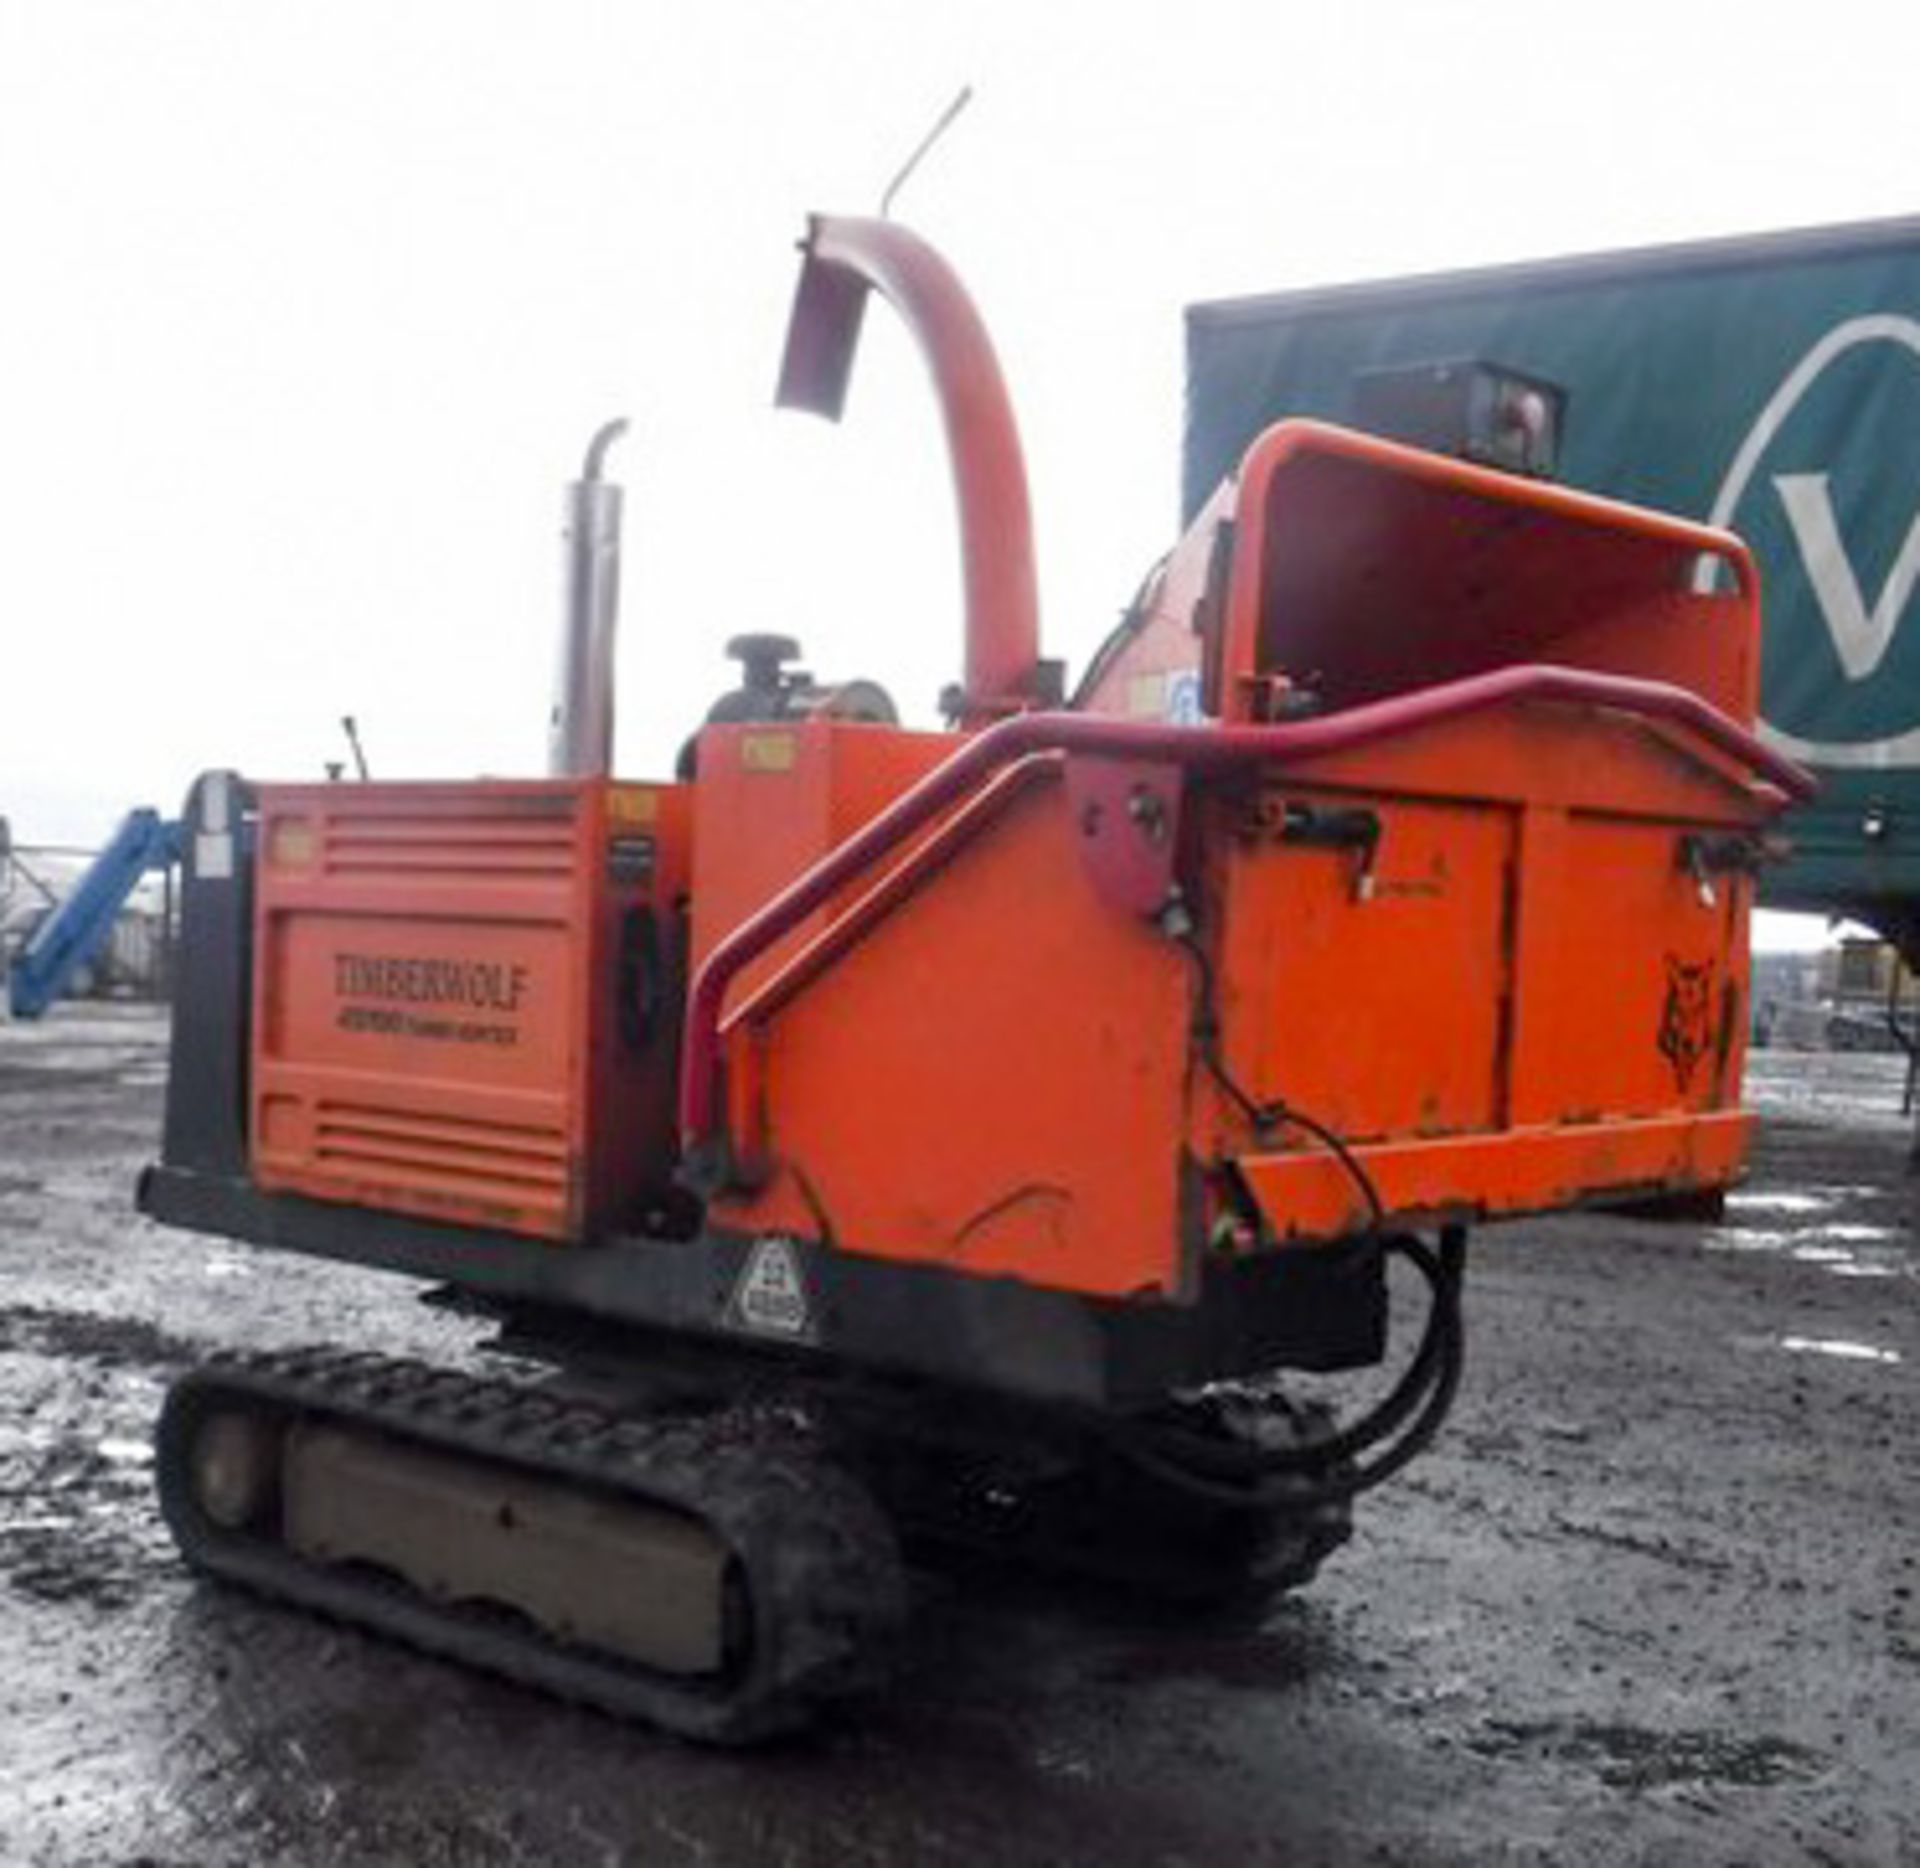 2010 TIMBERWOLF 190 TFTR TRACKED WOODCHIPPER, S/N 210156017-A9, ASSET NO 747-9071, 997HRS (NOT VERIF - Image 10 of 12